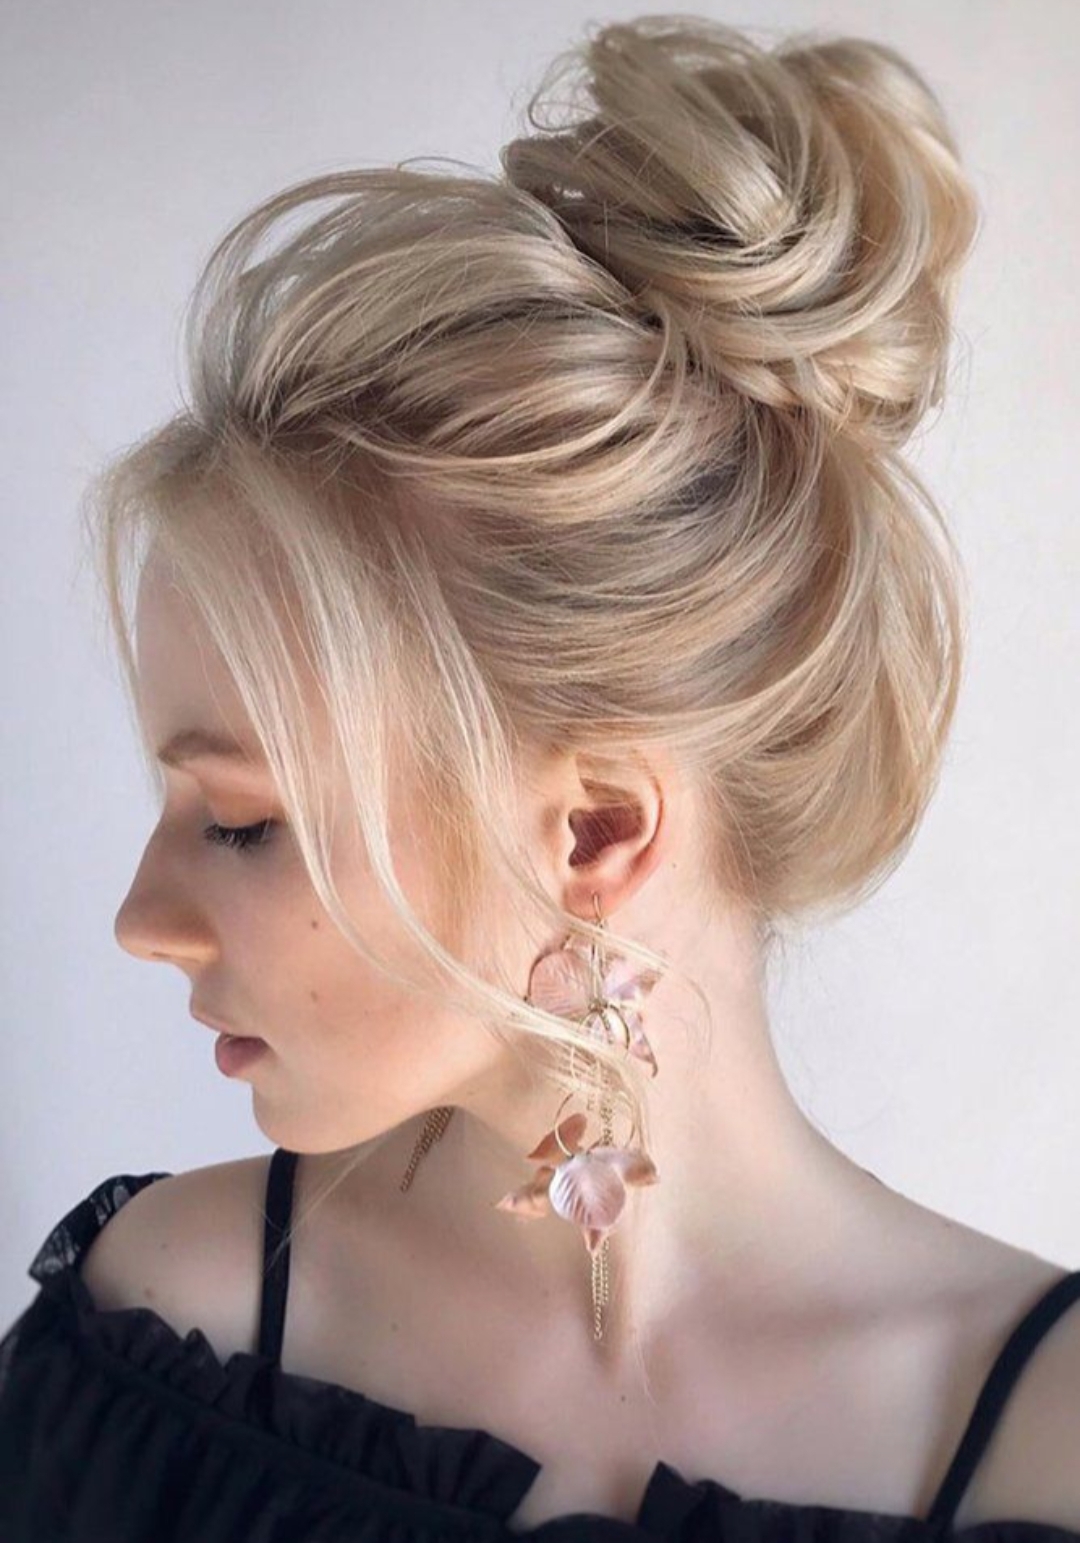 New Year Eve's Hairstyles To Inspire You